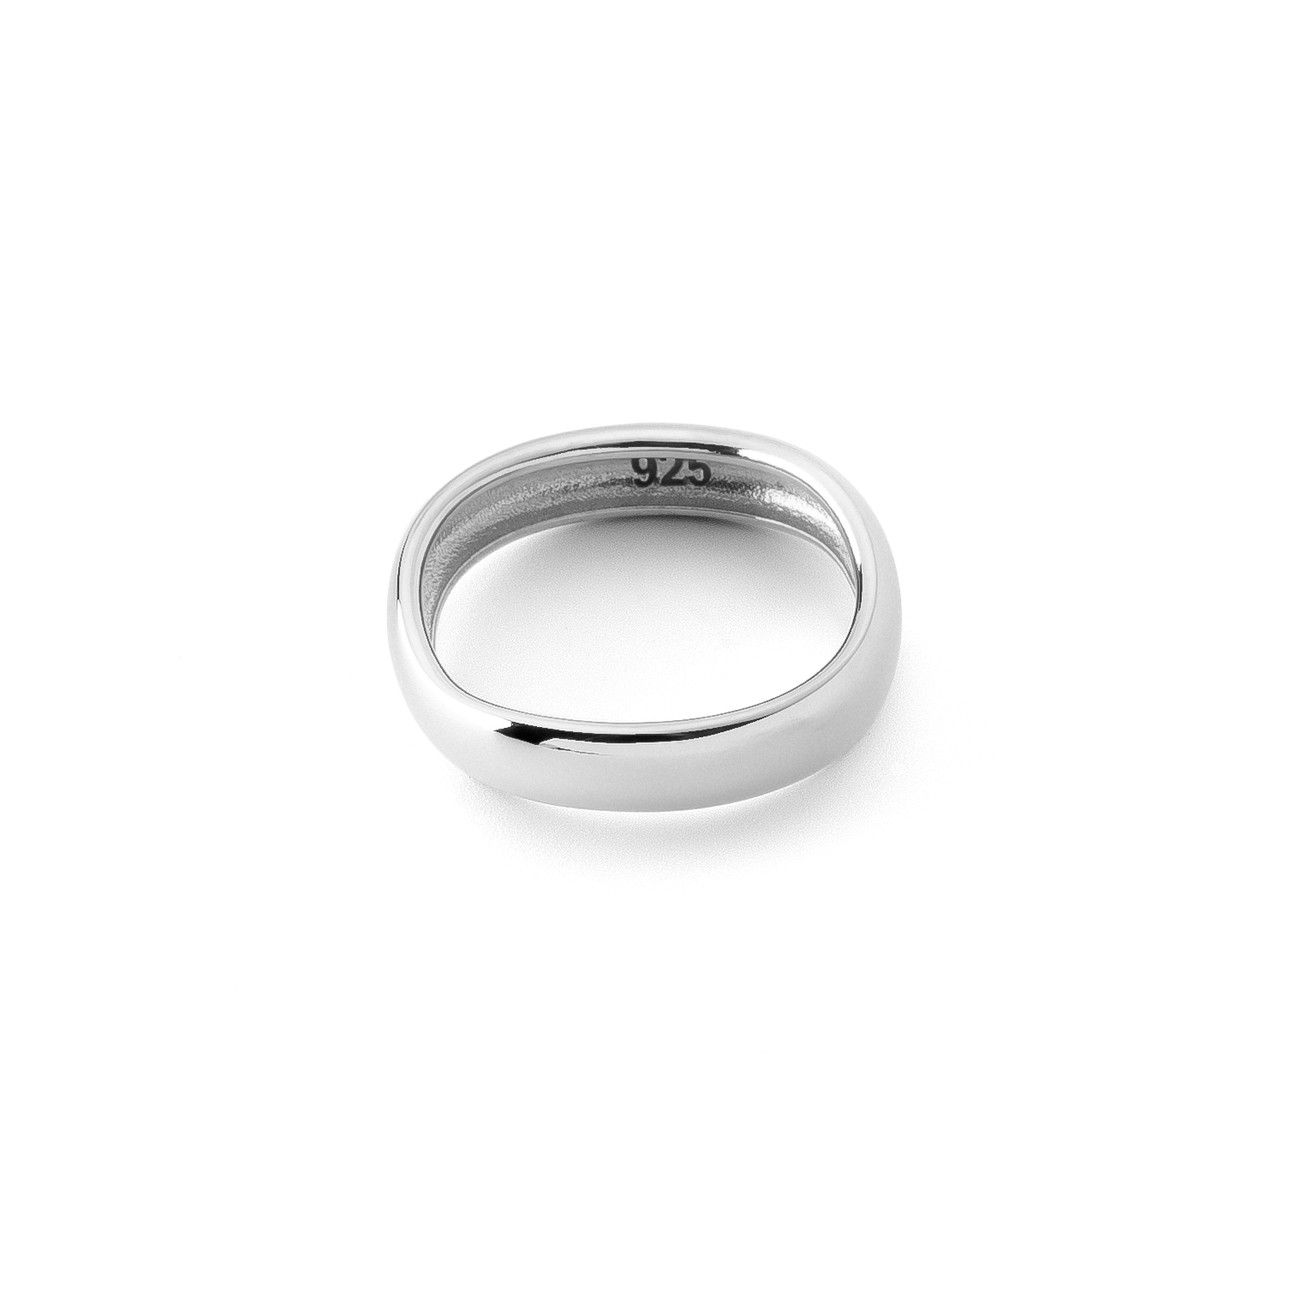 Silver wave ring, sterling silver 925